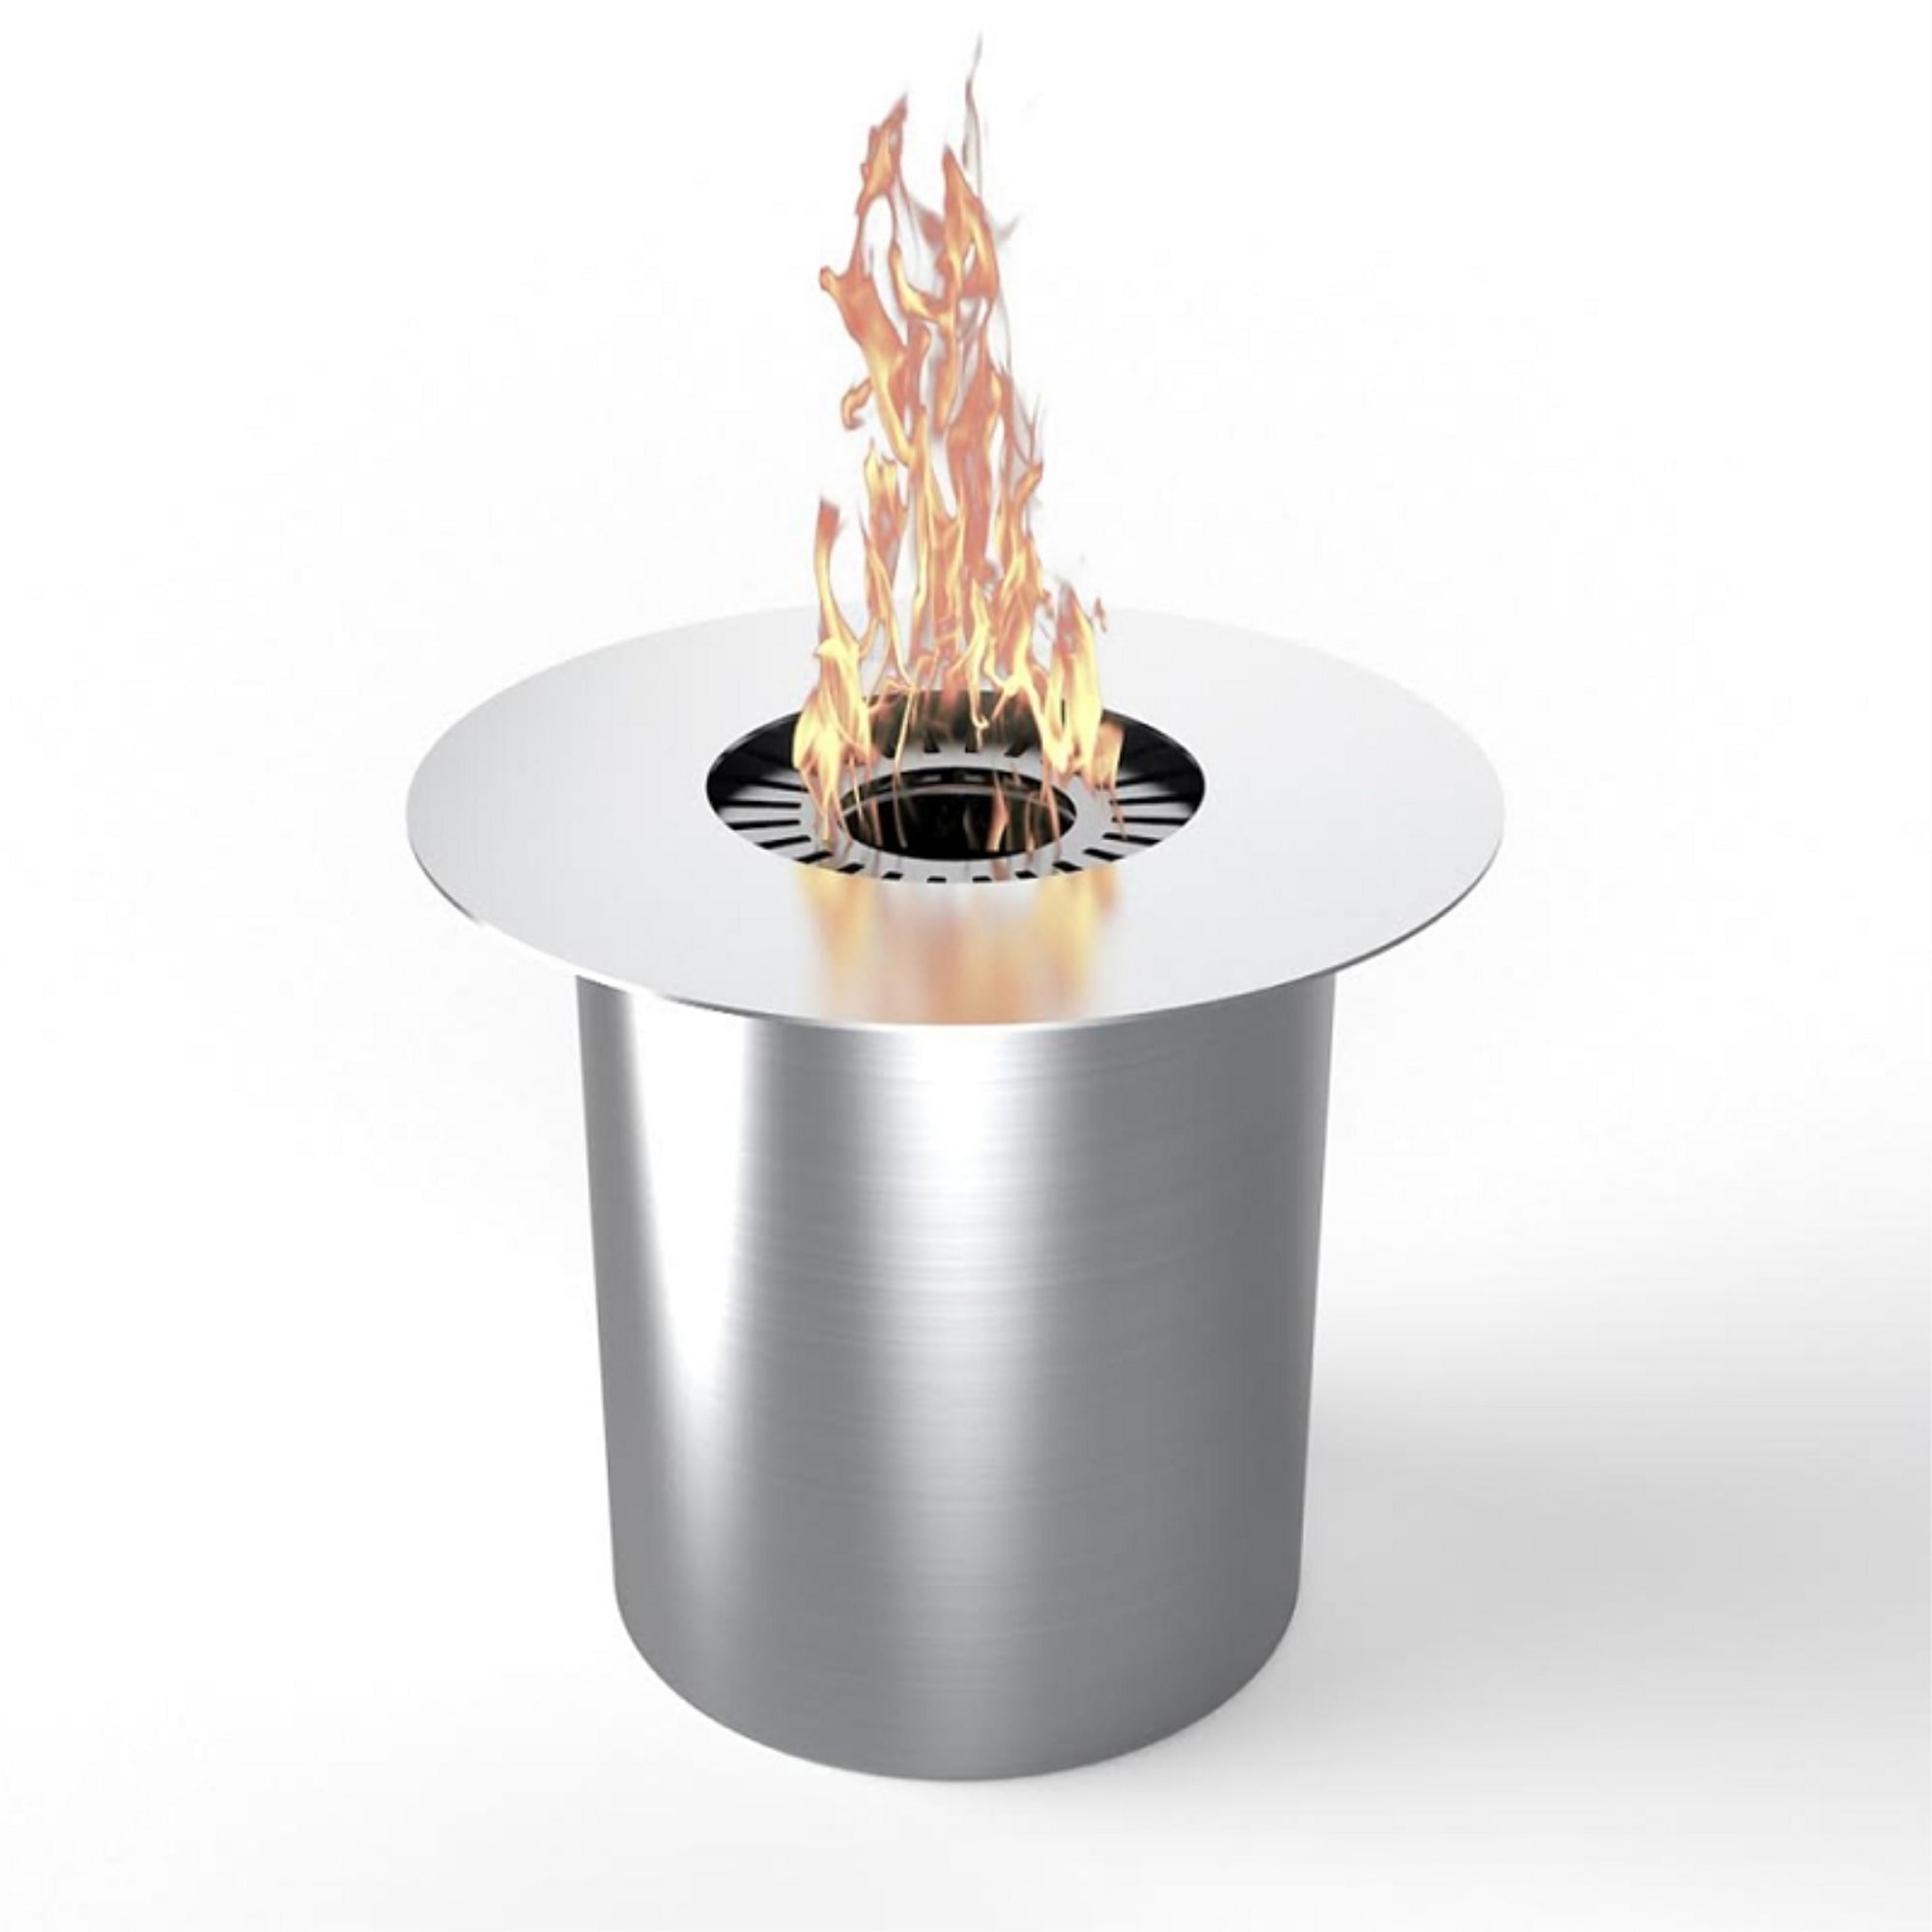 Moda Flame PRO Ethanol Circular Cup Burner Insert For Easy Conversion from Gel Fuel Cans, Gel Fireplace Fuel, Gel Fire Cans